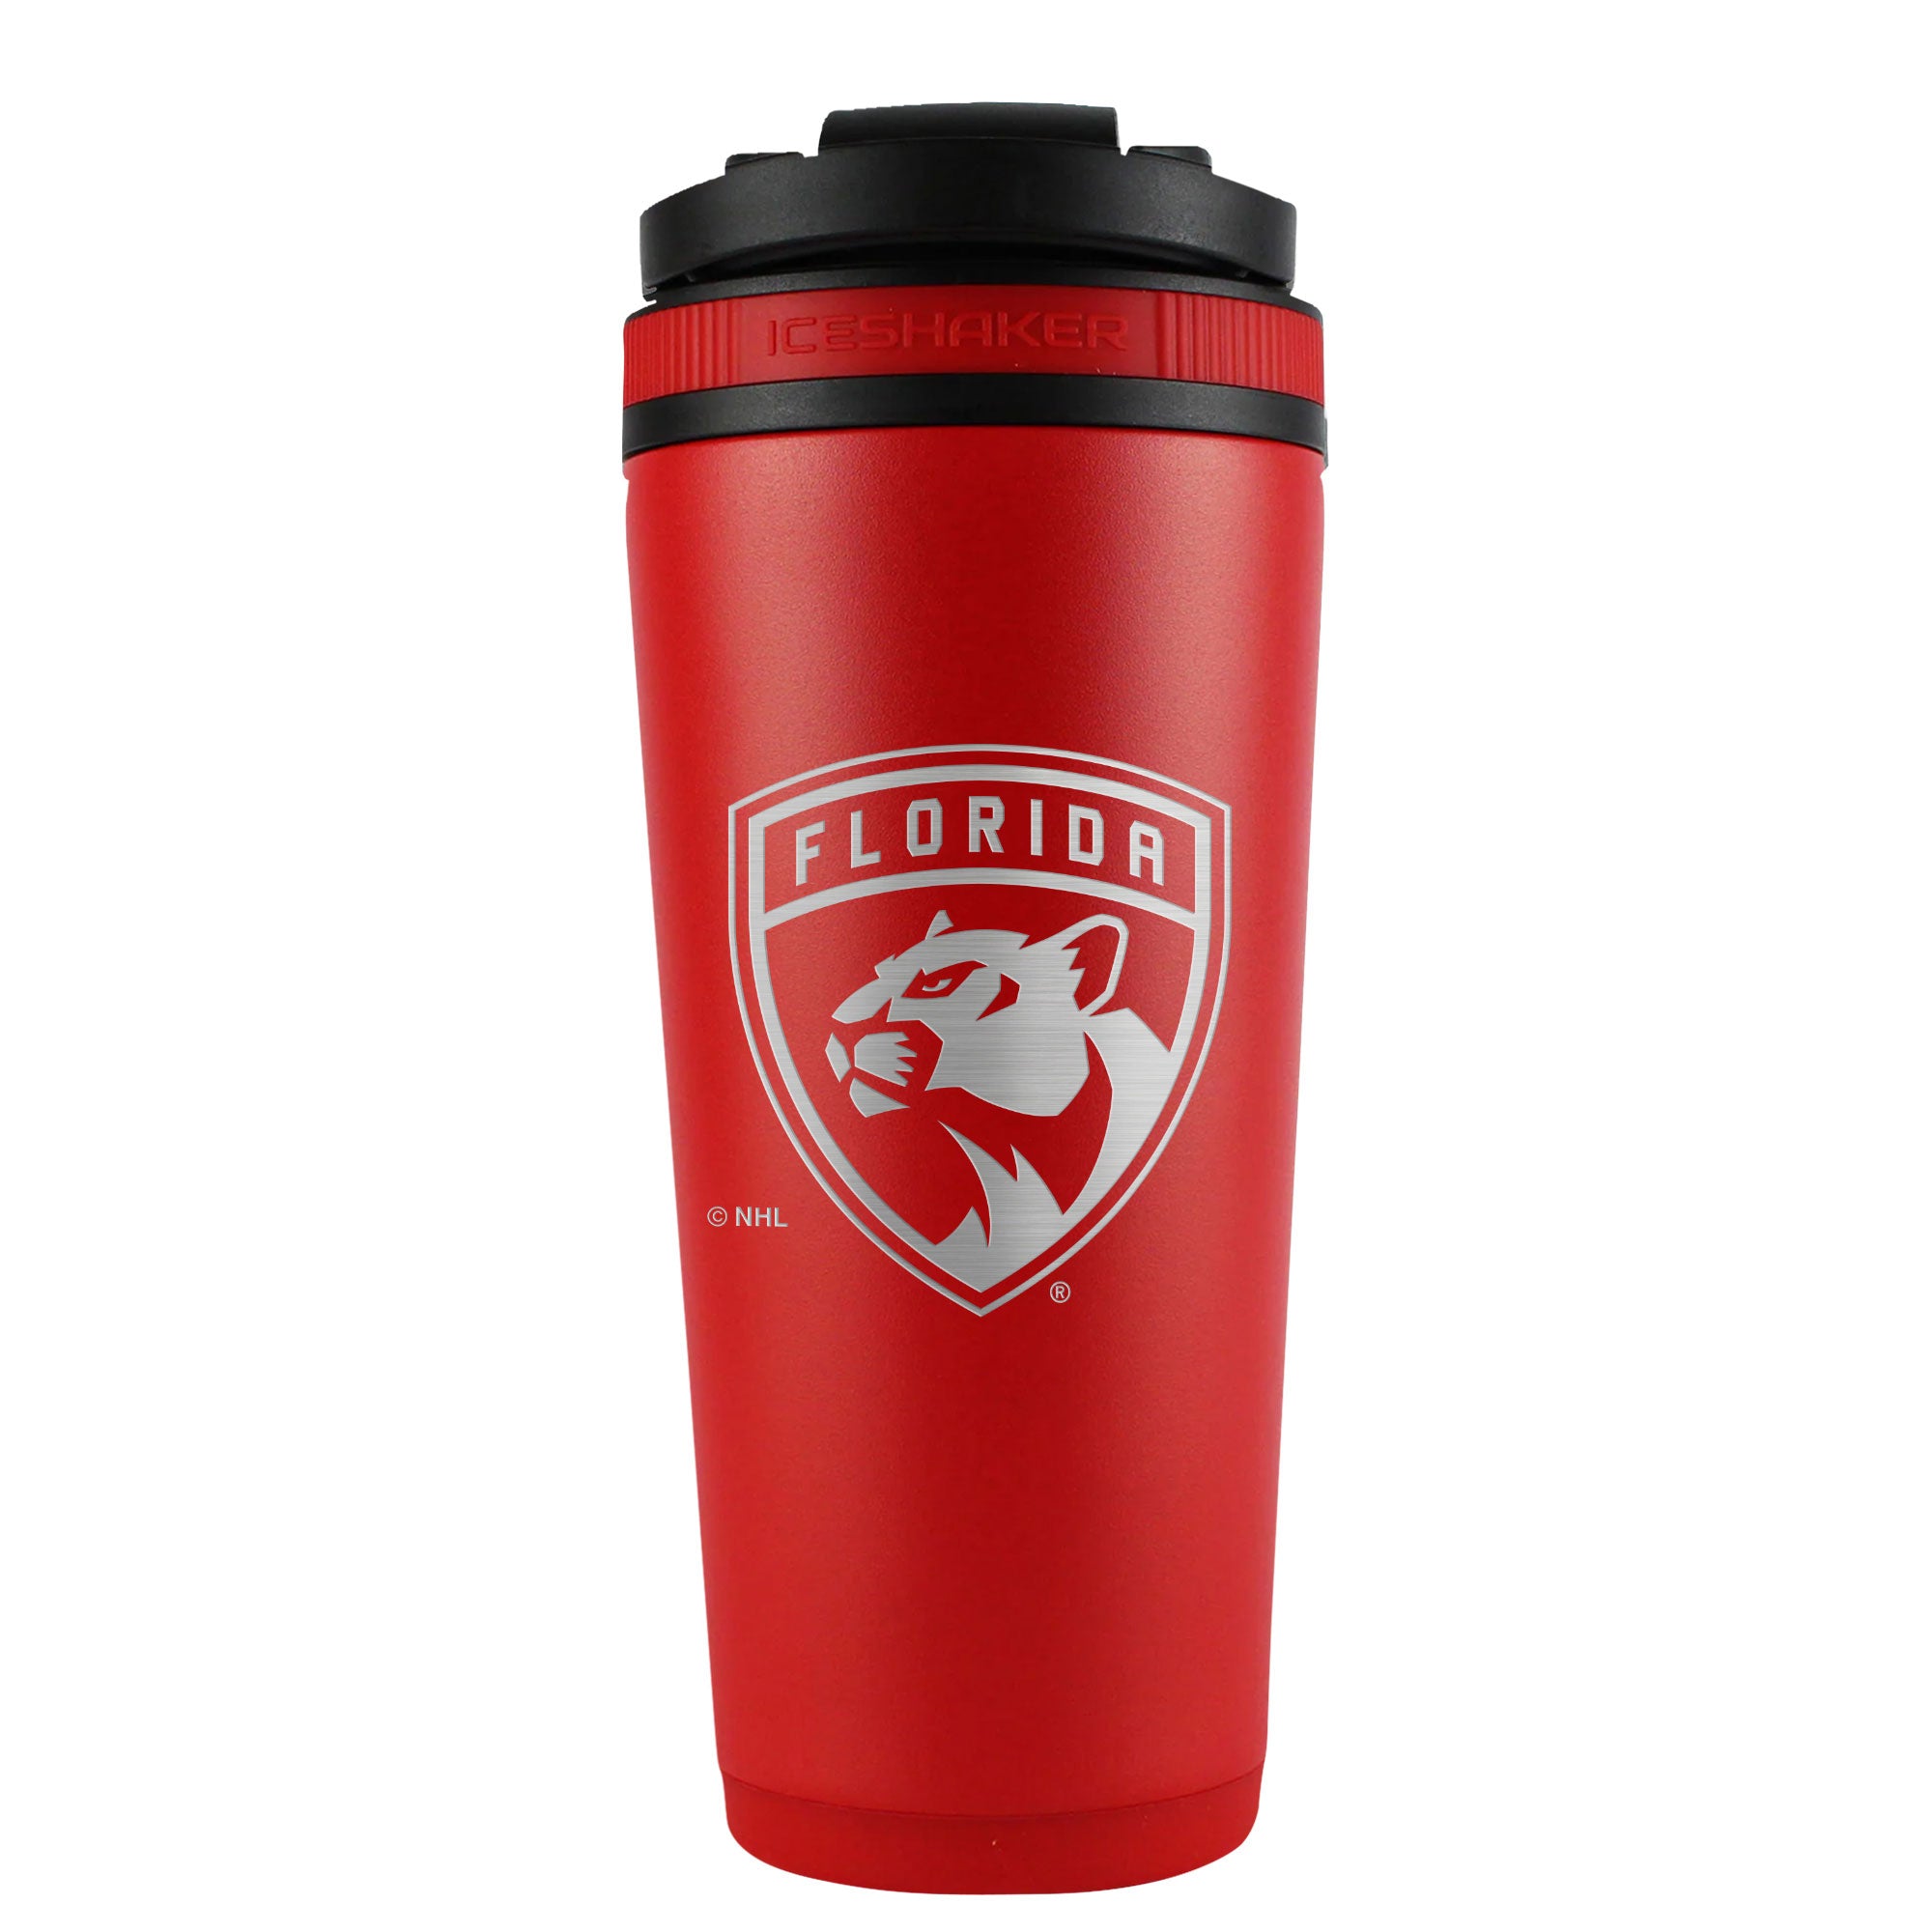 Officially Licensed Florida Panthers 26oz Ice Shaker - Red